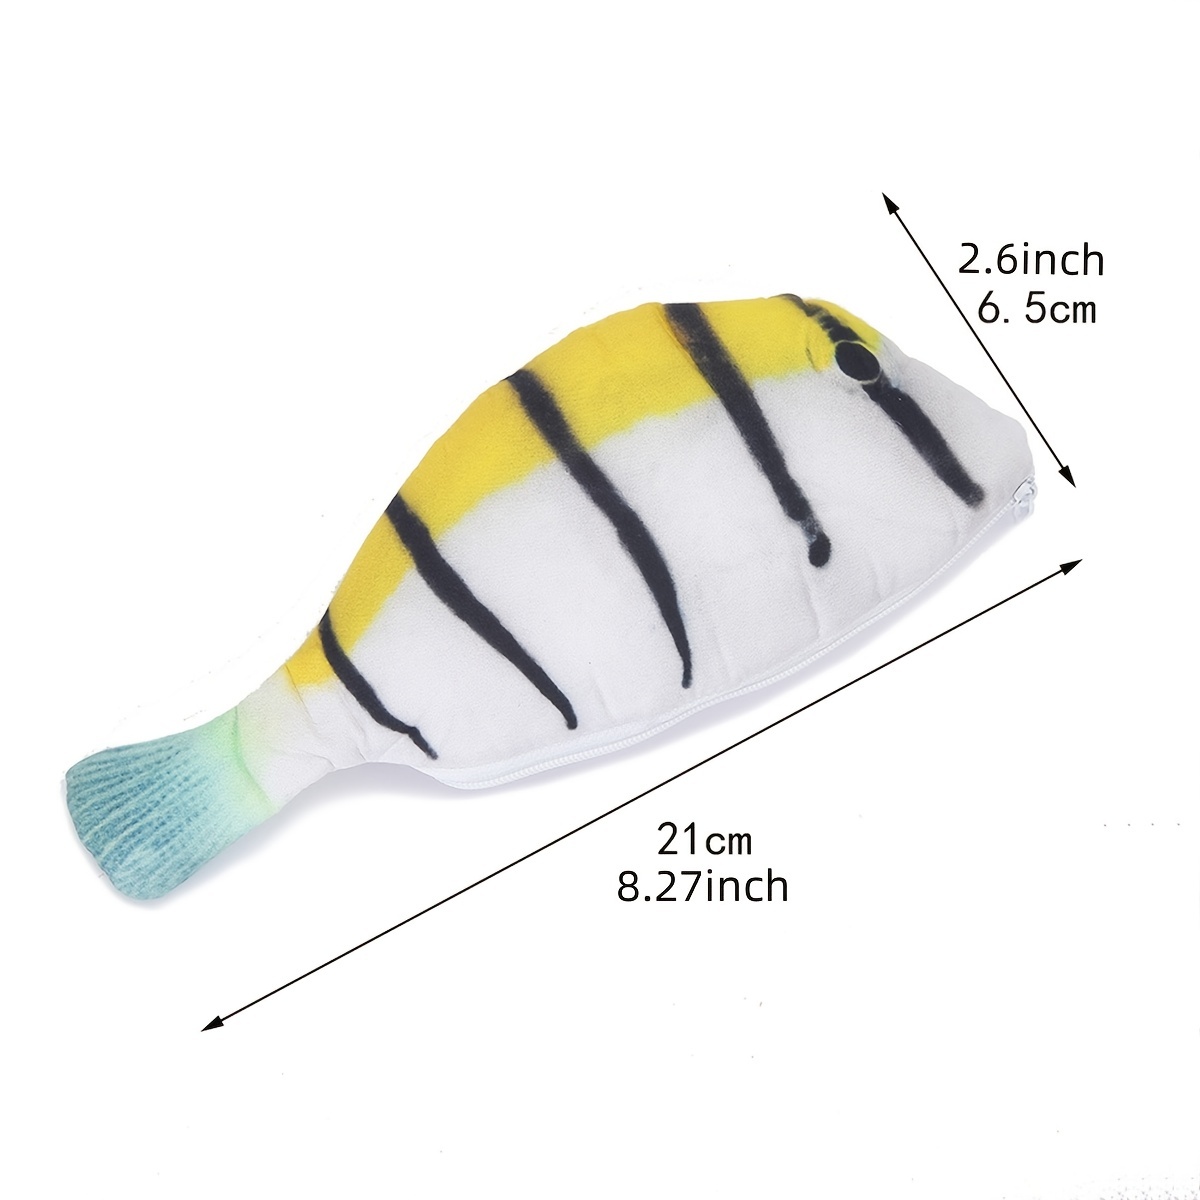 TQWQT 2 Pcs Of Simulation Fish-shaped Pencil Case Waterproof Pencil Bag  Fish Coin Purse Novelty Stationery Bag Gift Boys Girls School Office  Supplies